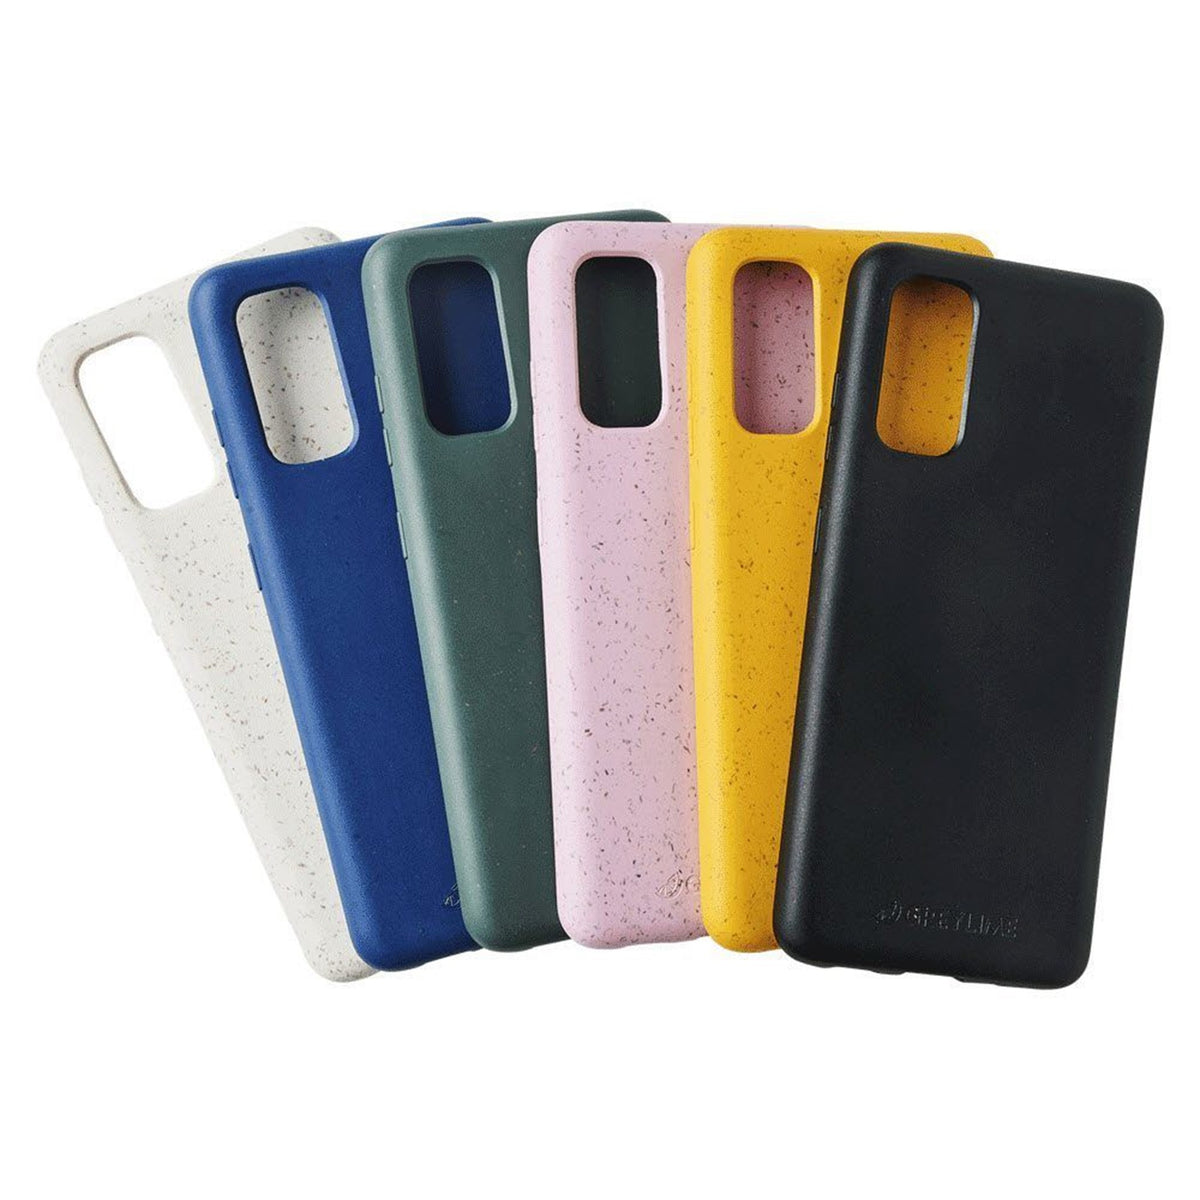 GreyLime-Samsung-Galaxy-S20-Biodegradable-Cover-Gruppe.jpg